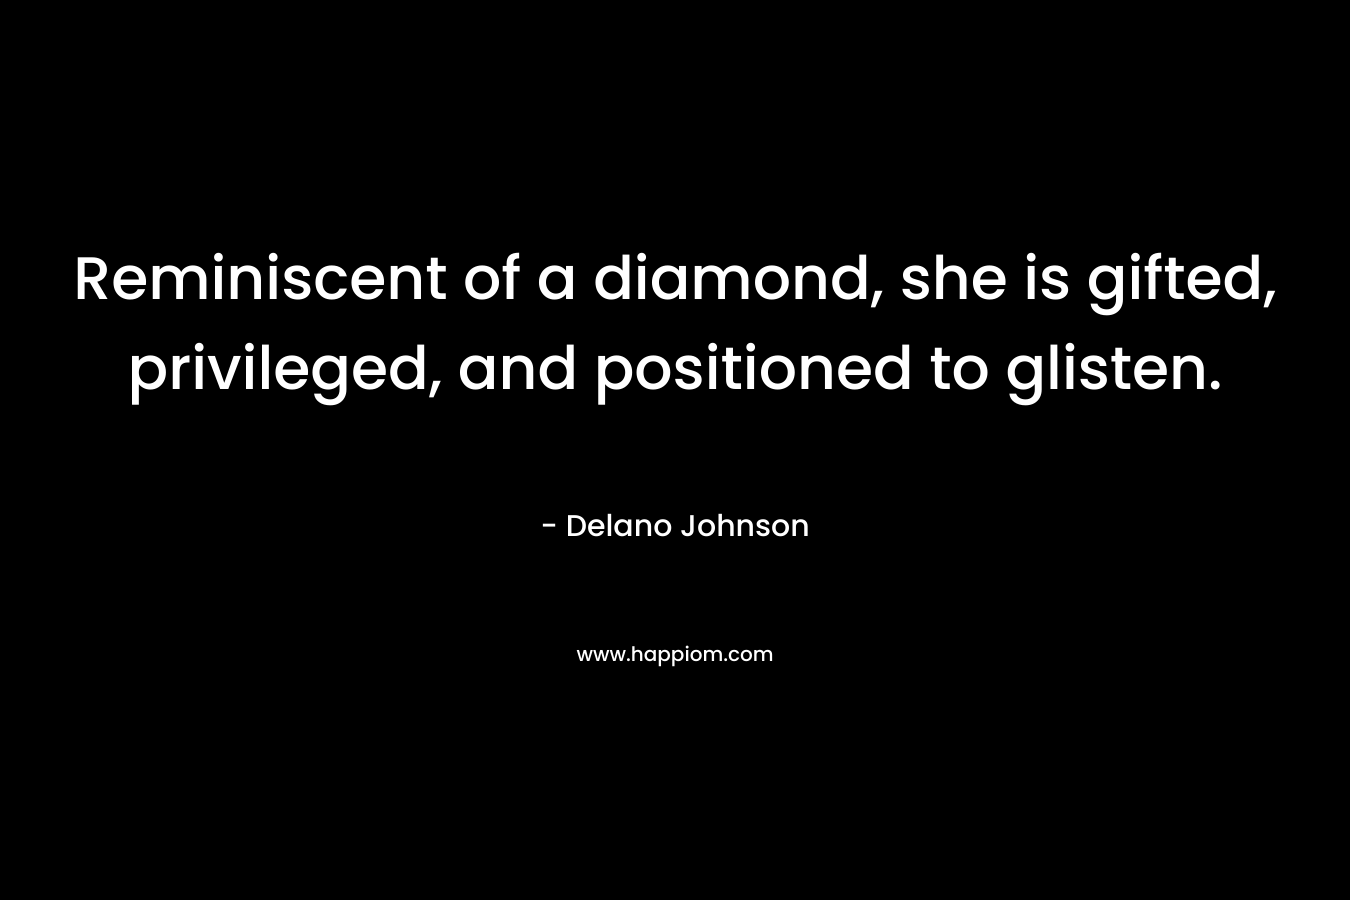 Reminiscent of a diamond, she is gifted, privileged, and positioned to glisten. – Delano Johnson